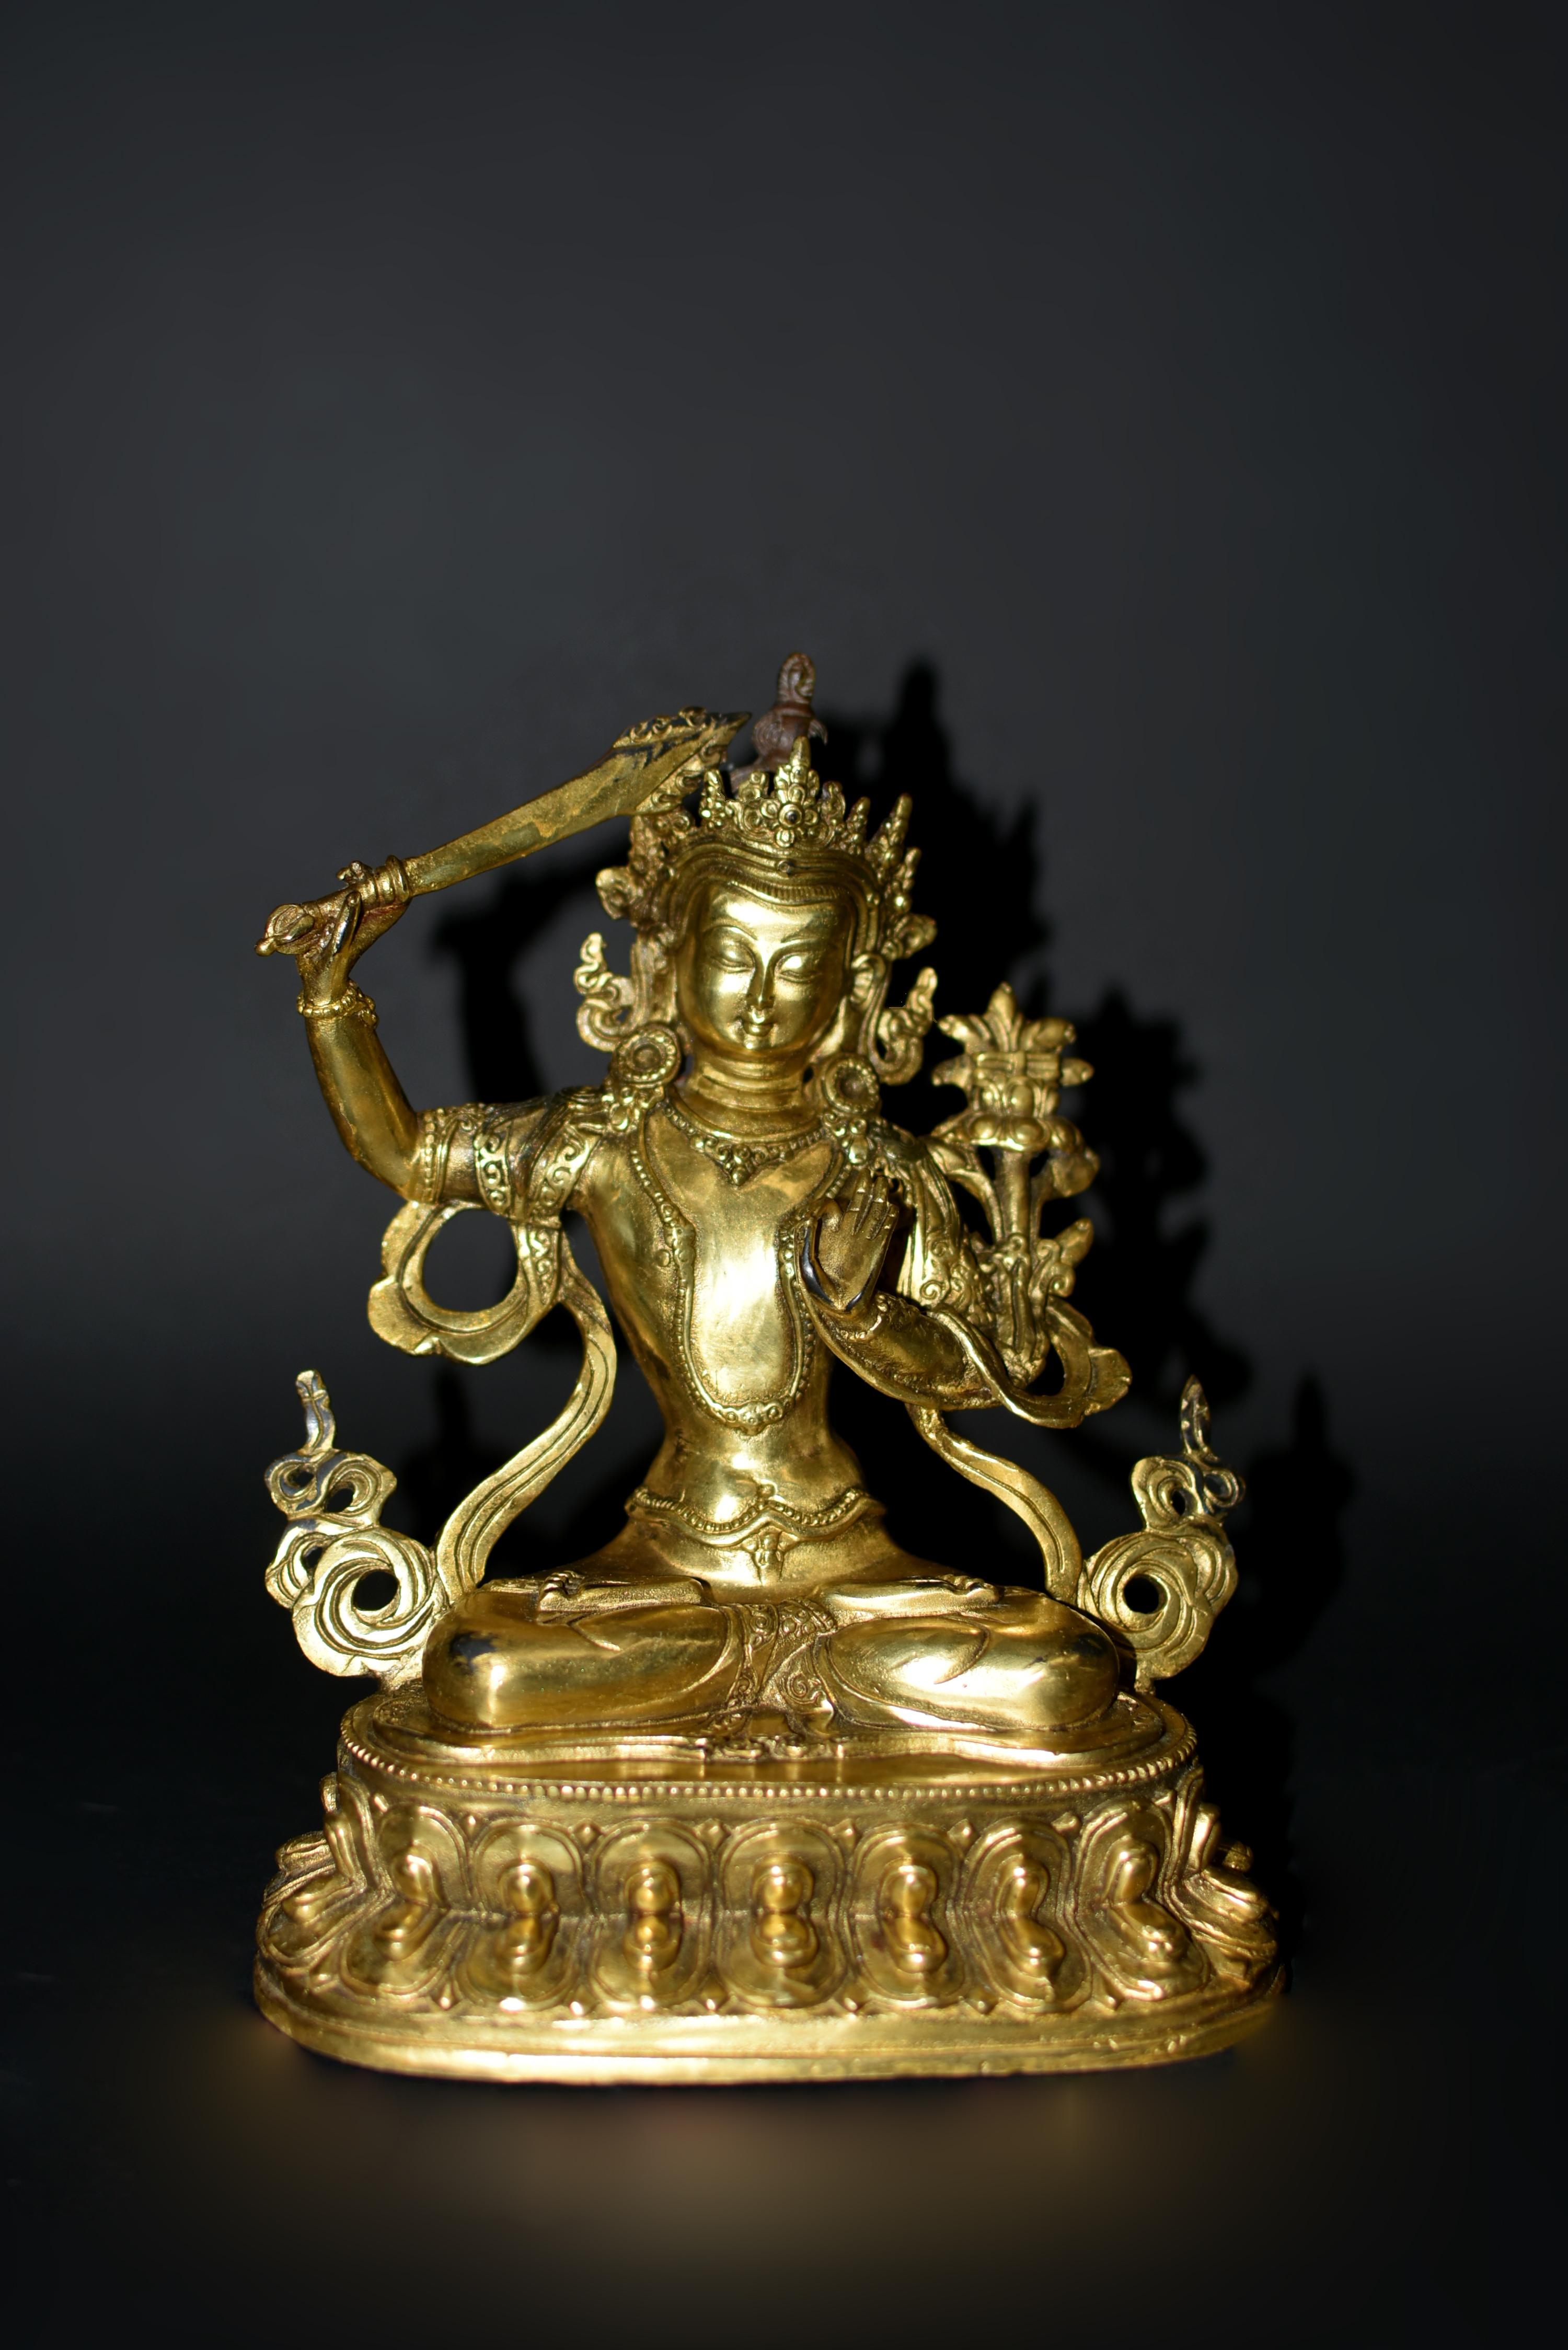 A beautiful, brightly gilded bronze statue of Tibetan Bodhisattva Manjushree. Seated in vajrasana on double lotus base, his right hand holding the sword of wisdom and his left hand in jnana mudra, gesture of teaching. The smiling face with downcast